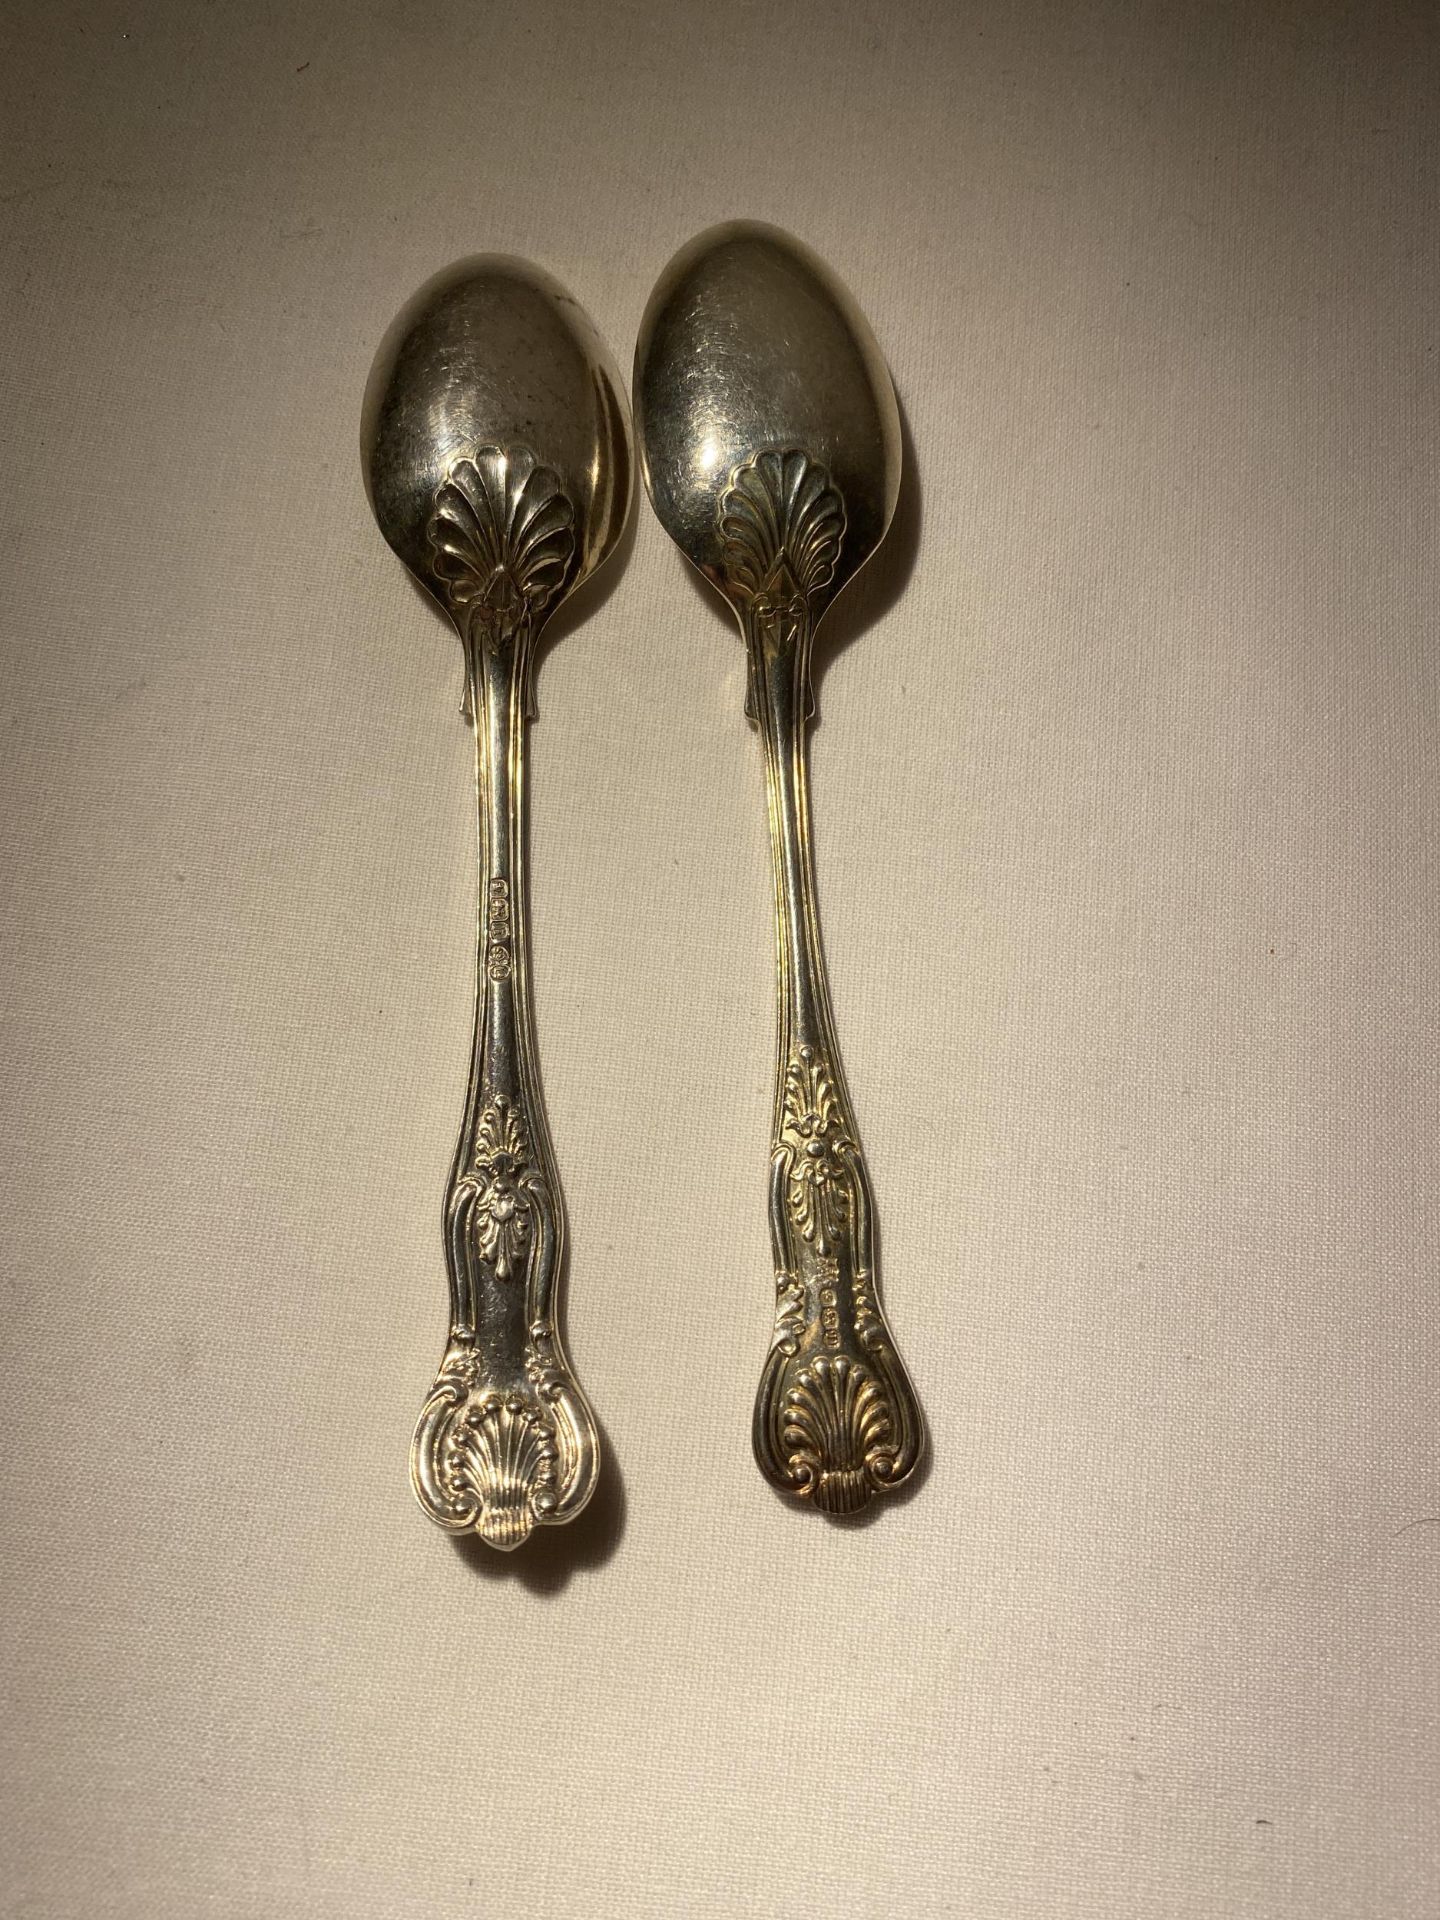 TWO SHEFFIELD HALLMARKED SILVER SPOONS, EARLIEST BEING 1925, MAKER WILLIAM HUTTON & SONS LTD, - Image 11 of 18